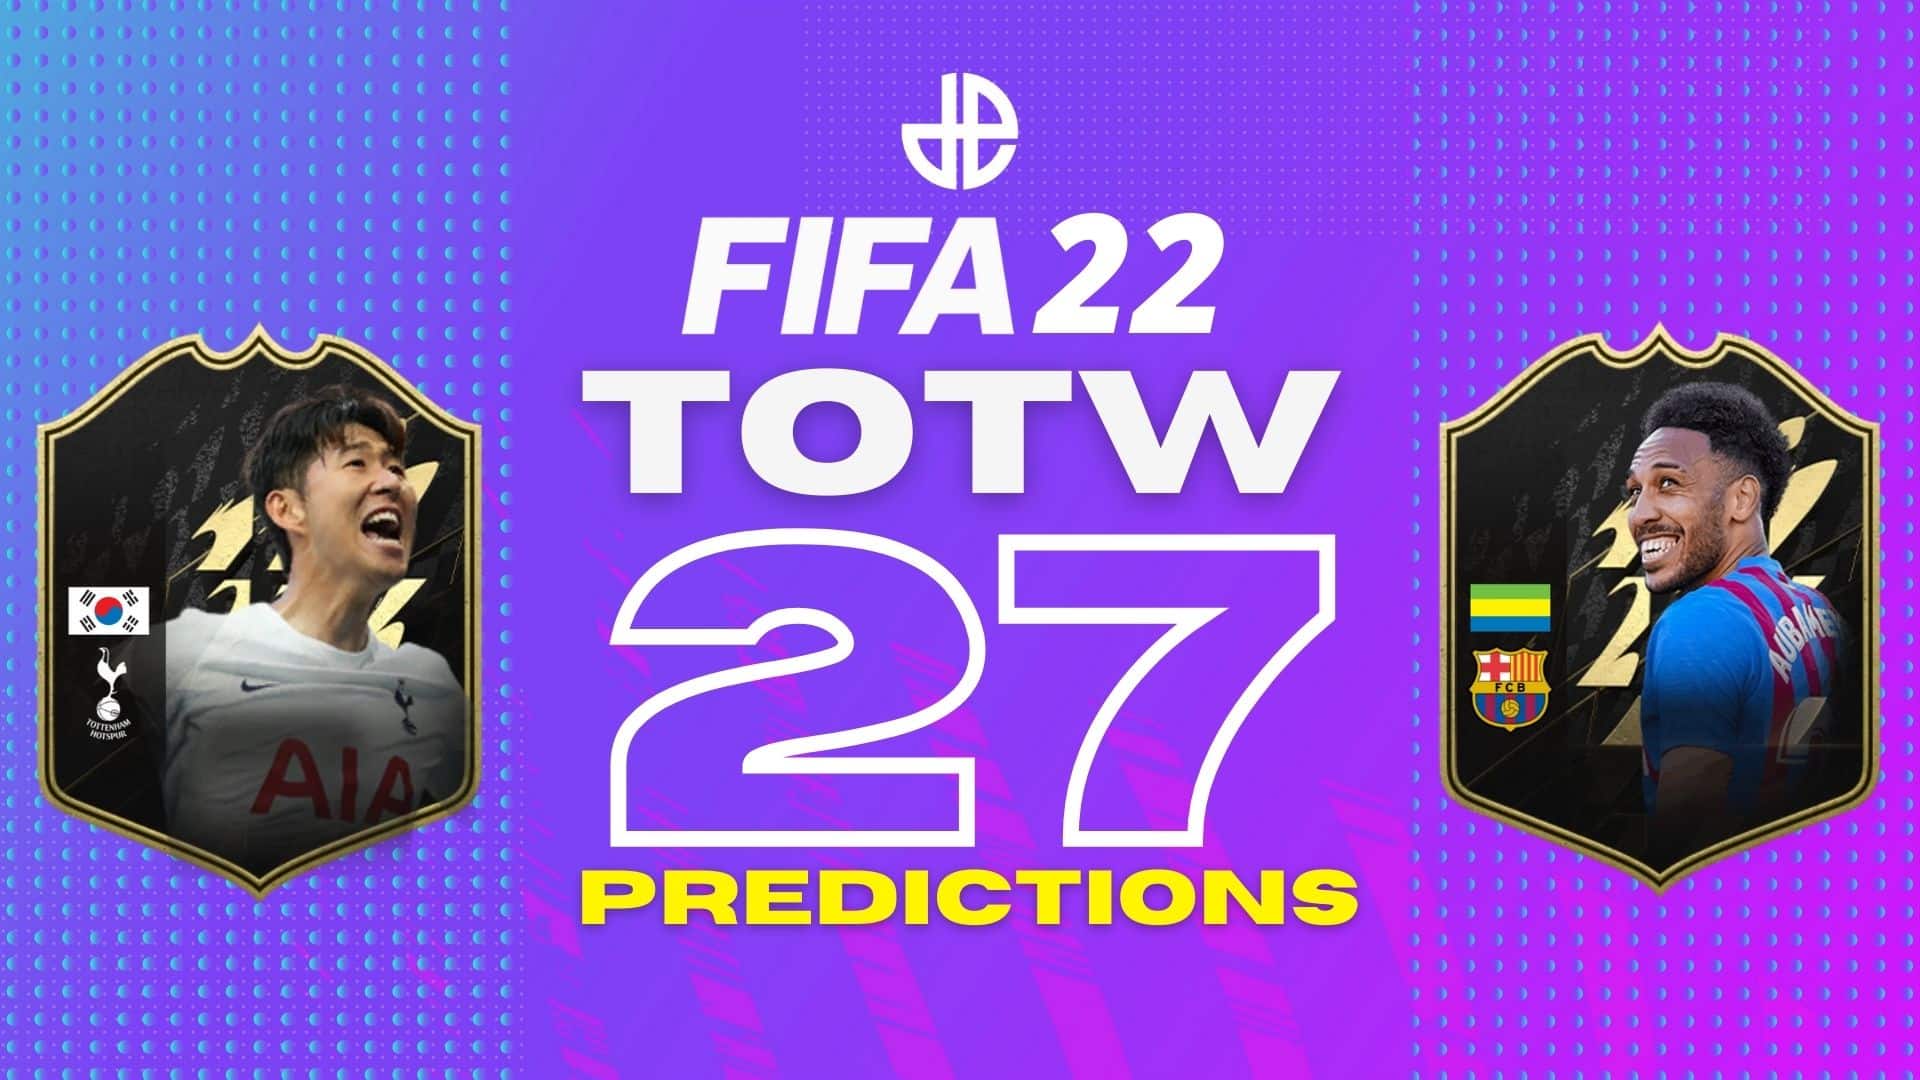 FIFA 22 TOTW 27 cards and predictions